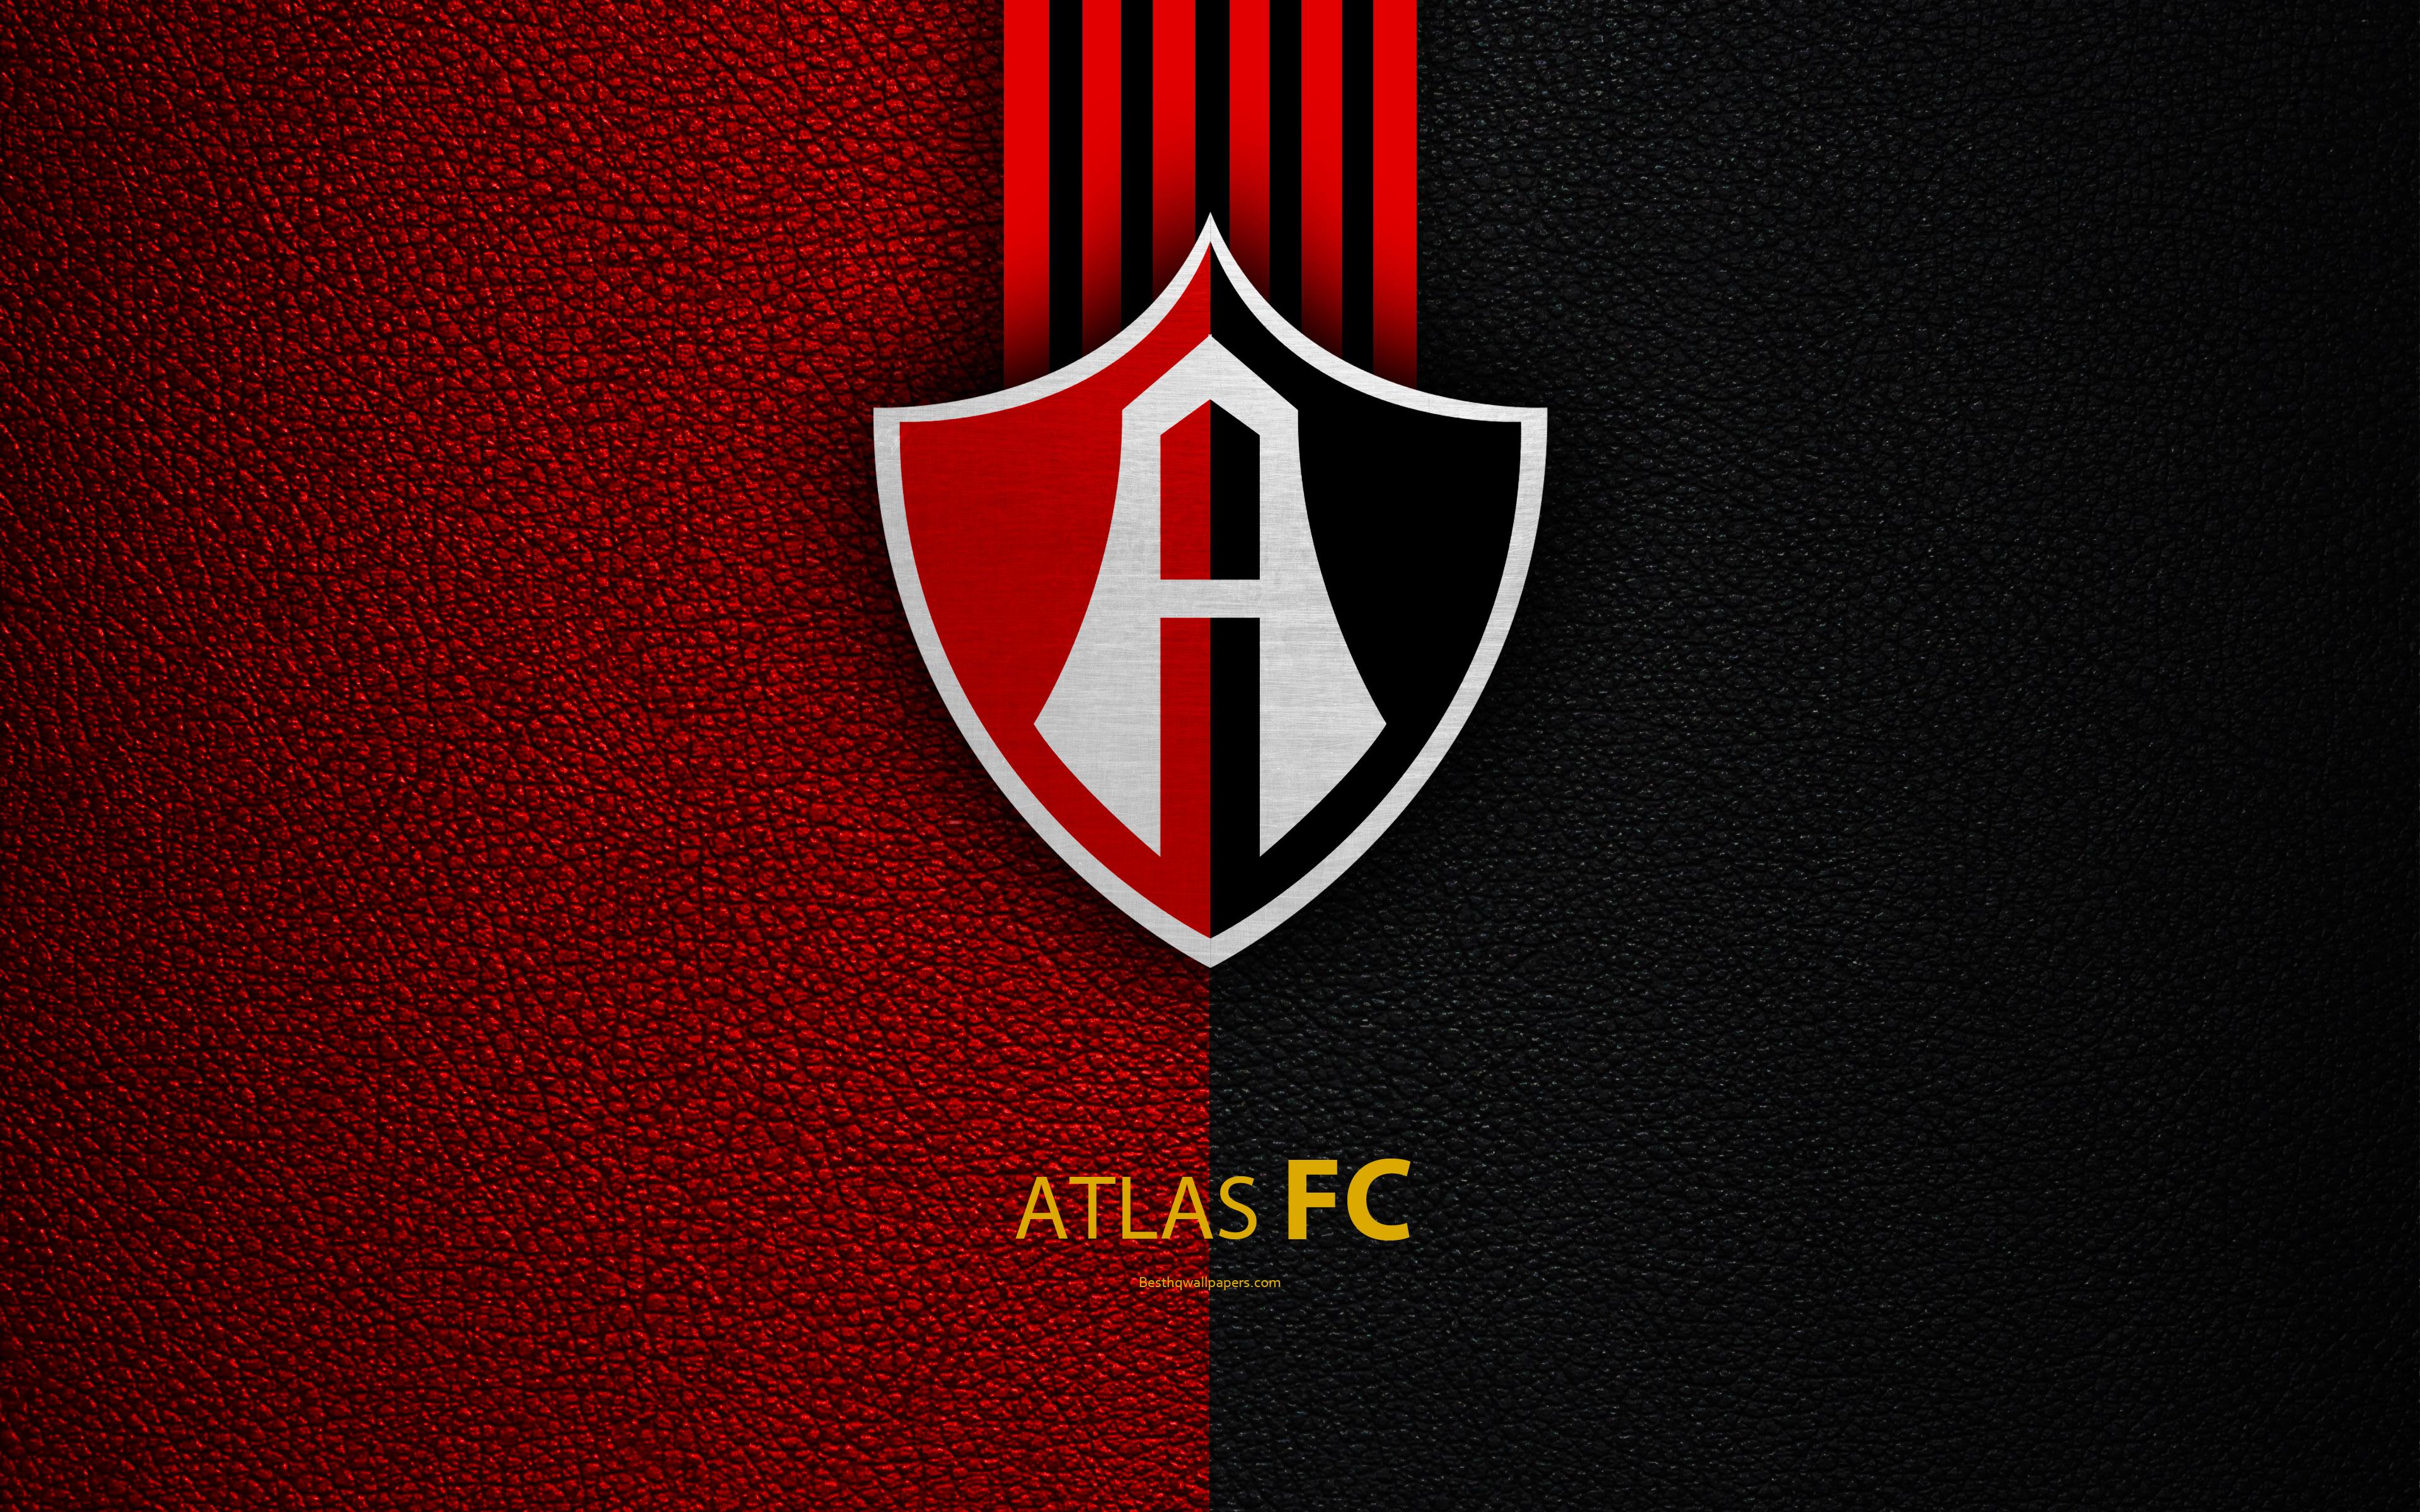 Download wallpaper Atlas FC, 4k, leather texture, logo, Mexican